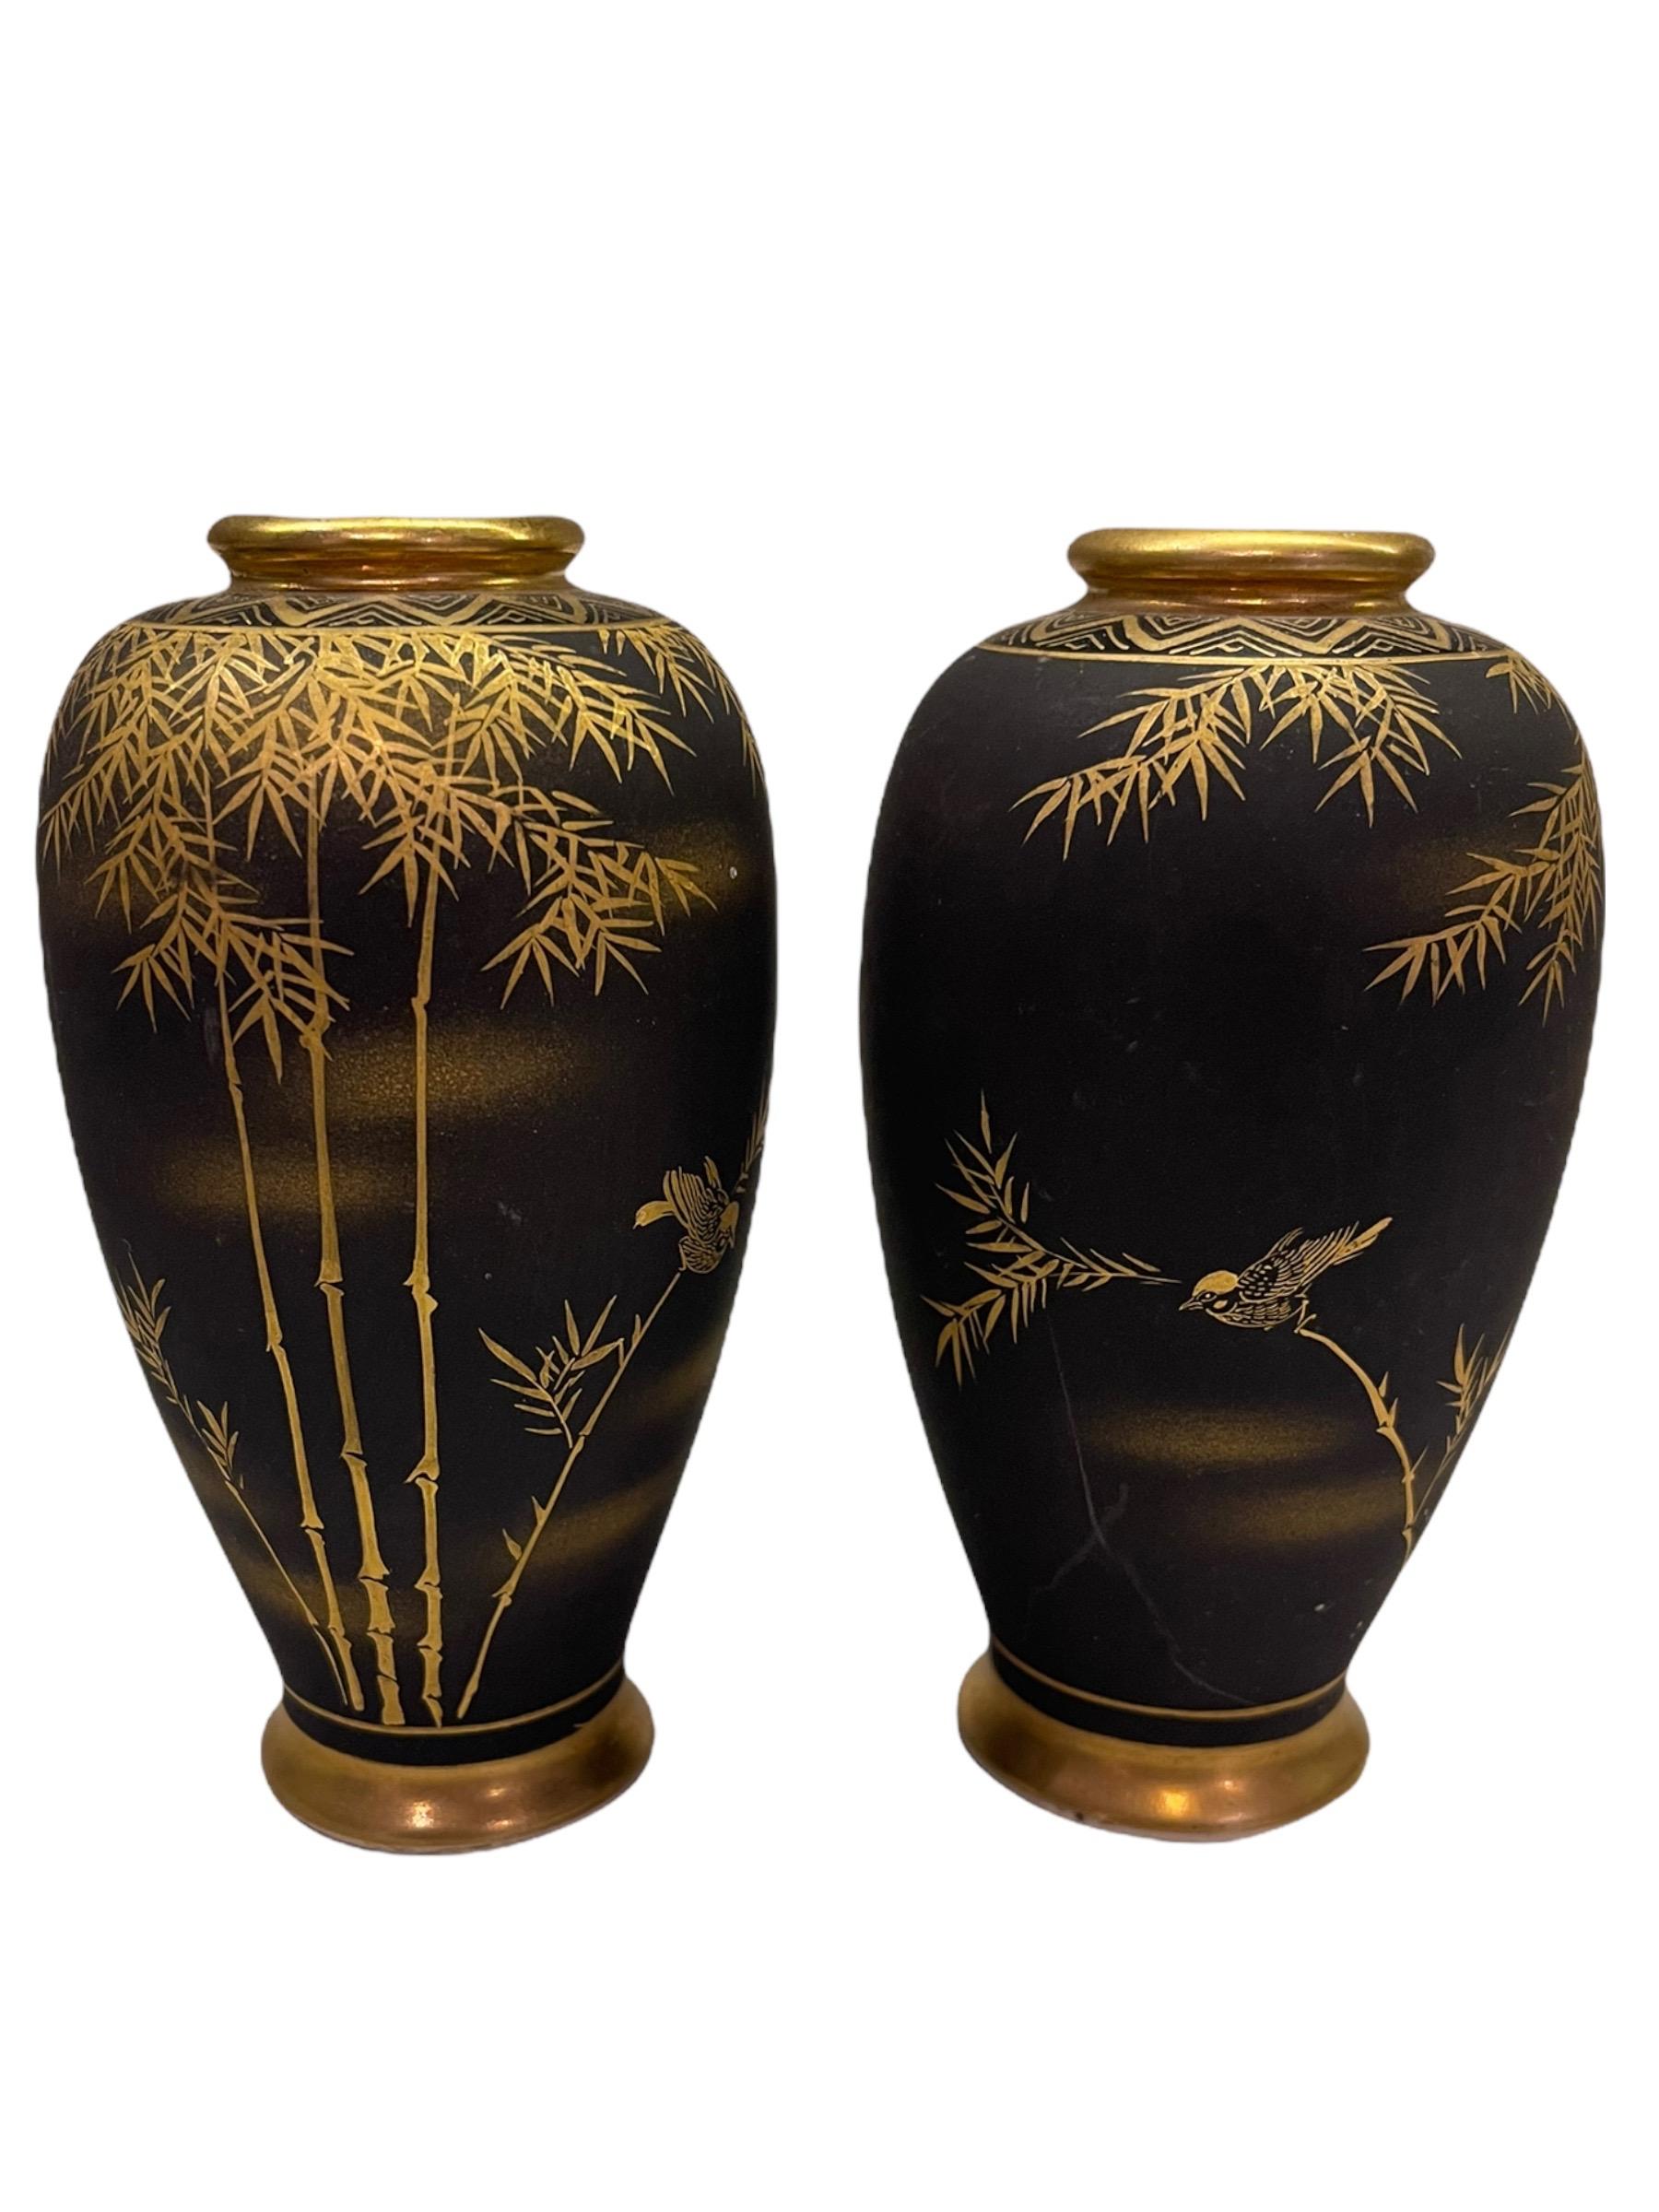 Early 20th century pair of small Japanese Kutani Porcelain Damascene vases. They are black, matte ground, and hand painted gold tone scenes of bamboo. These are signed in characters on the base.